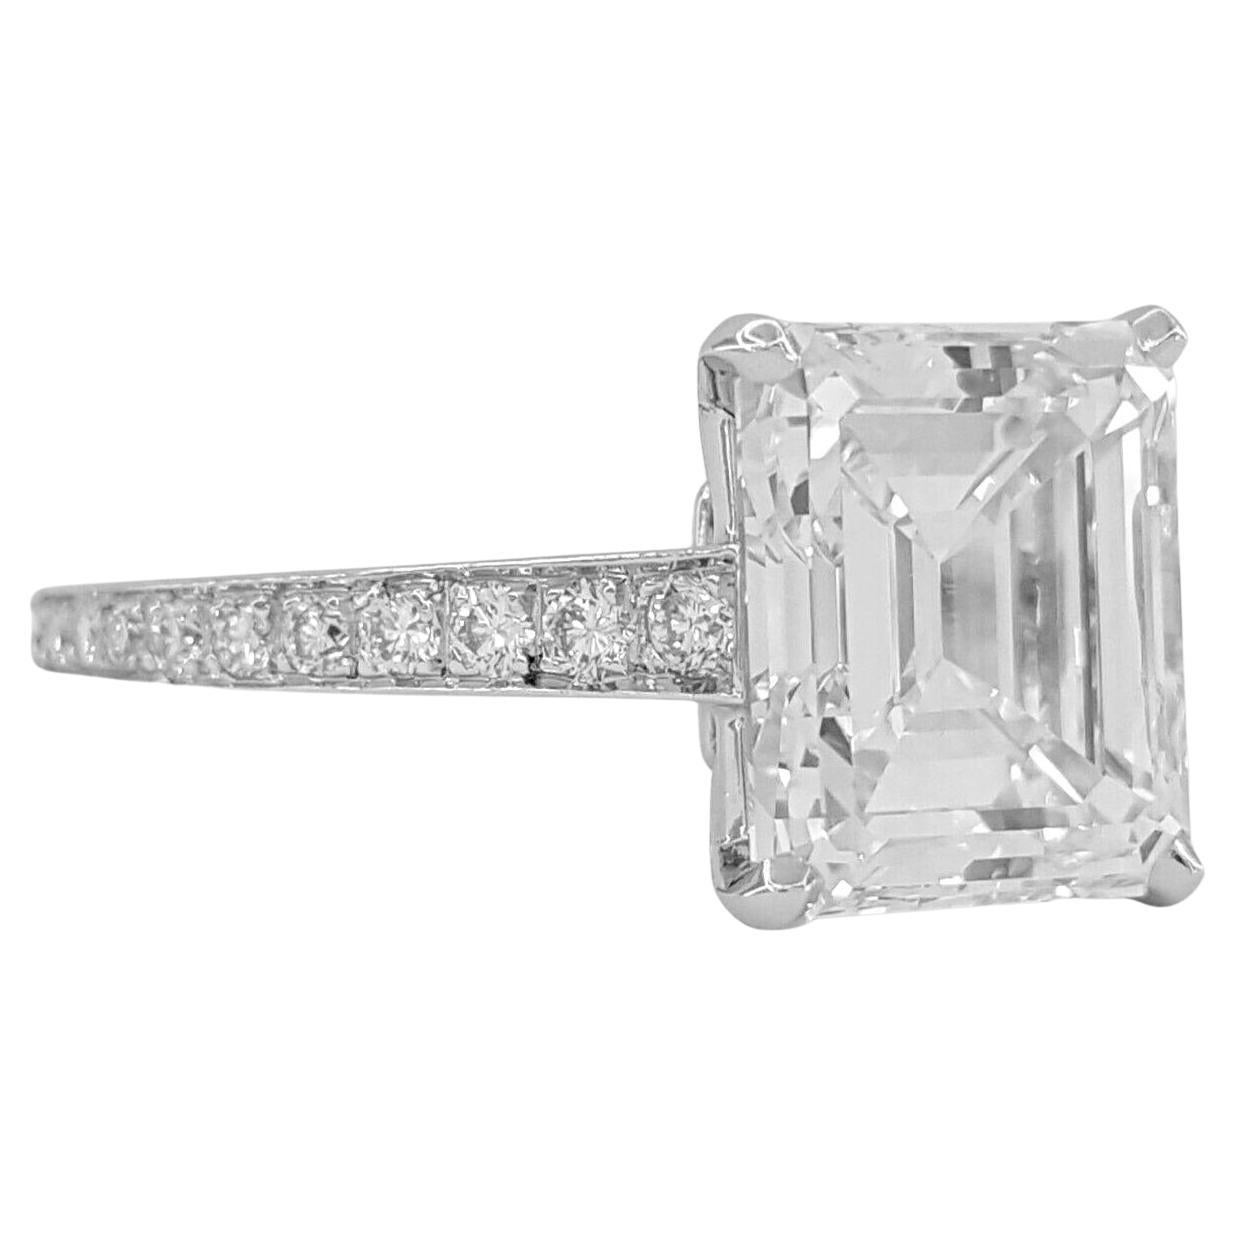 A magnificent 2.74 emerald cut diamond has excellent Int. Flawless clarity, beautiful white color, and a bright, lively, sophisticated cut! This is a very well cut diamond and has an amazing faceting pattern that emerald cut lovers will certainly